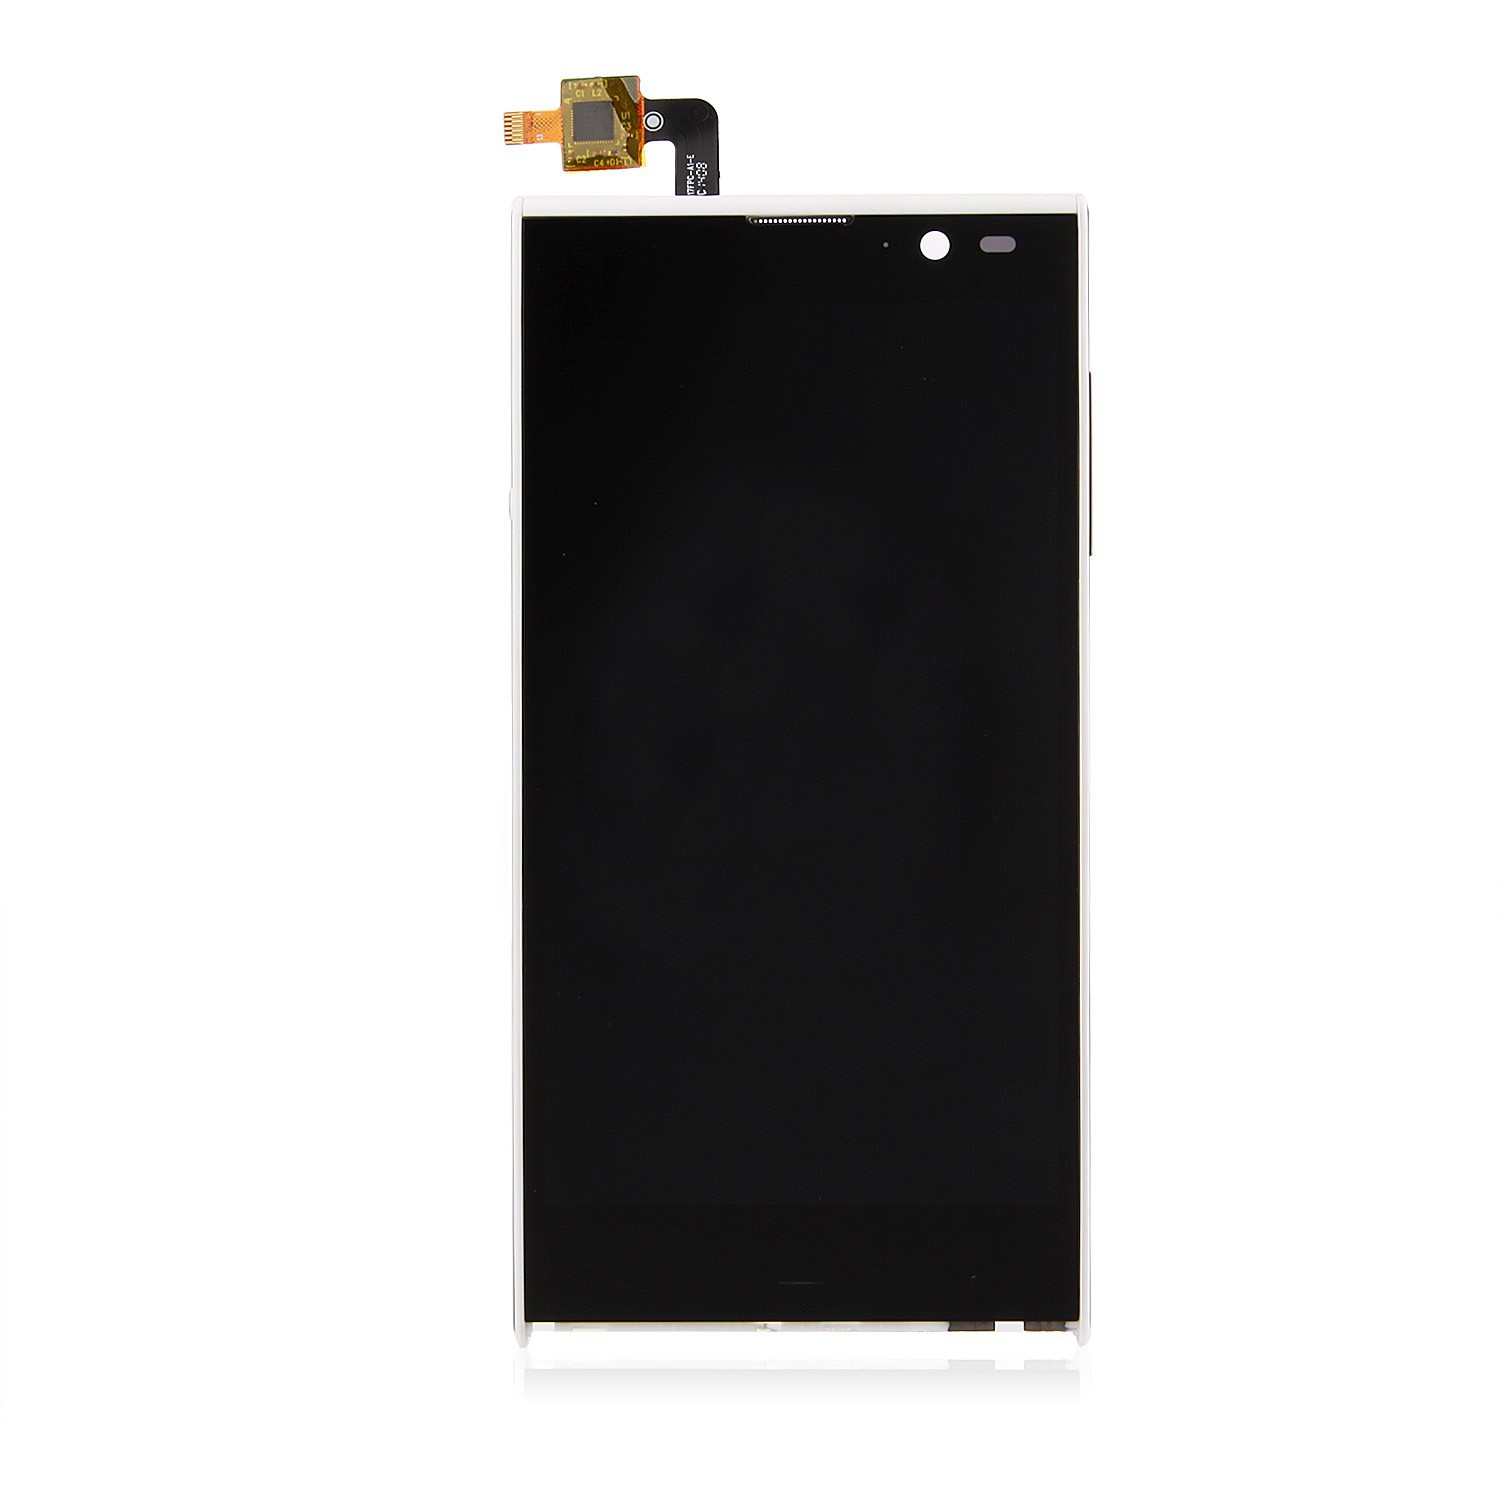 Ambrane tab and tablet Display Repair and Replacement In Chennai